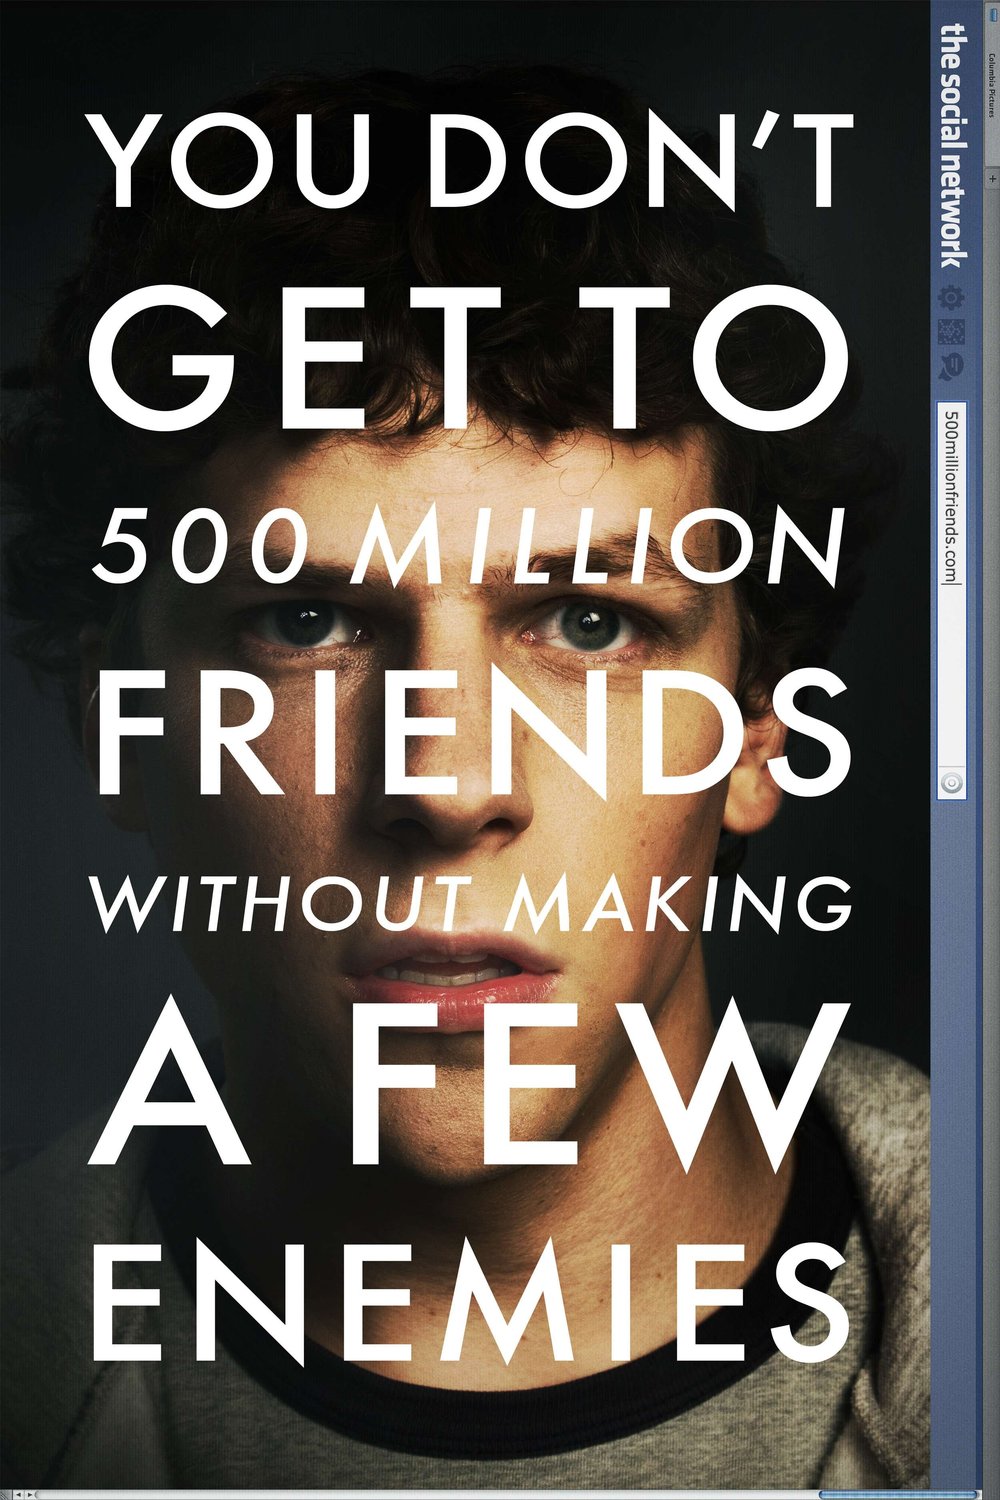 Poster of the movie The Social Network